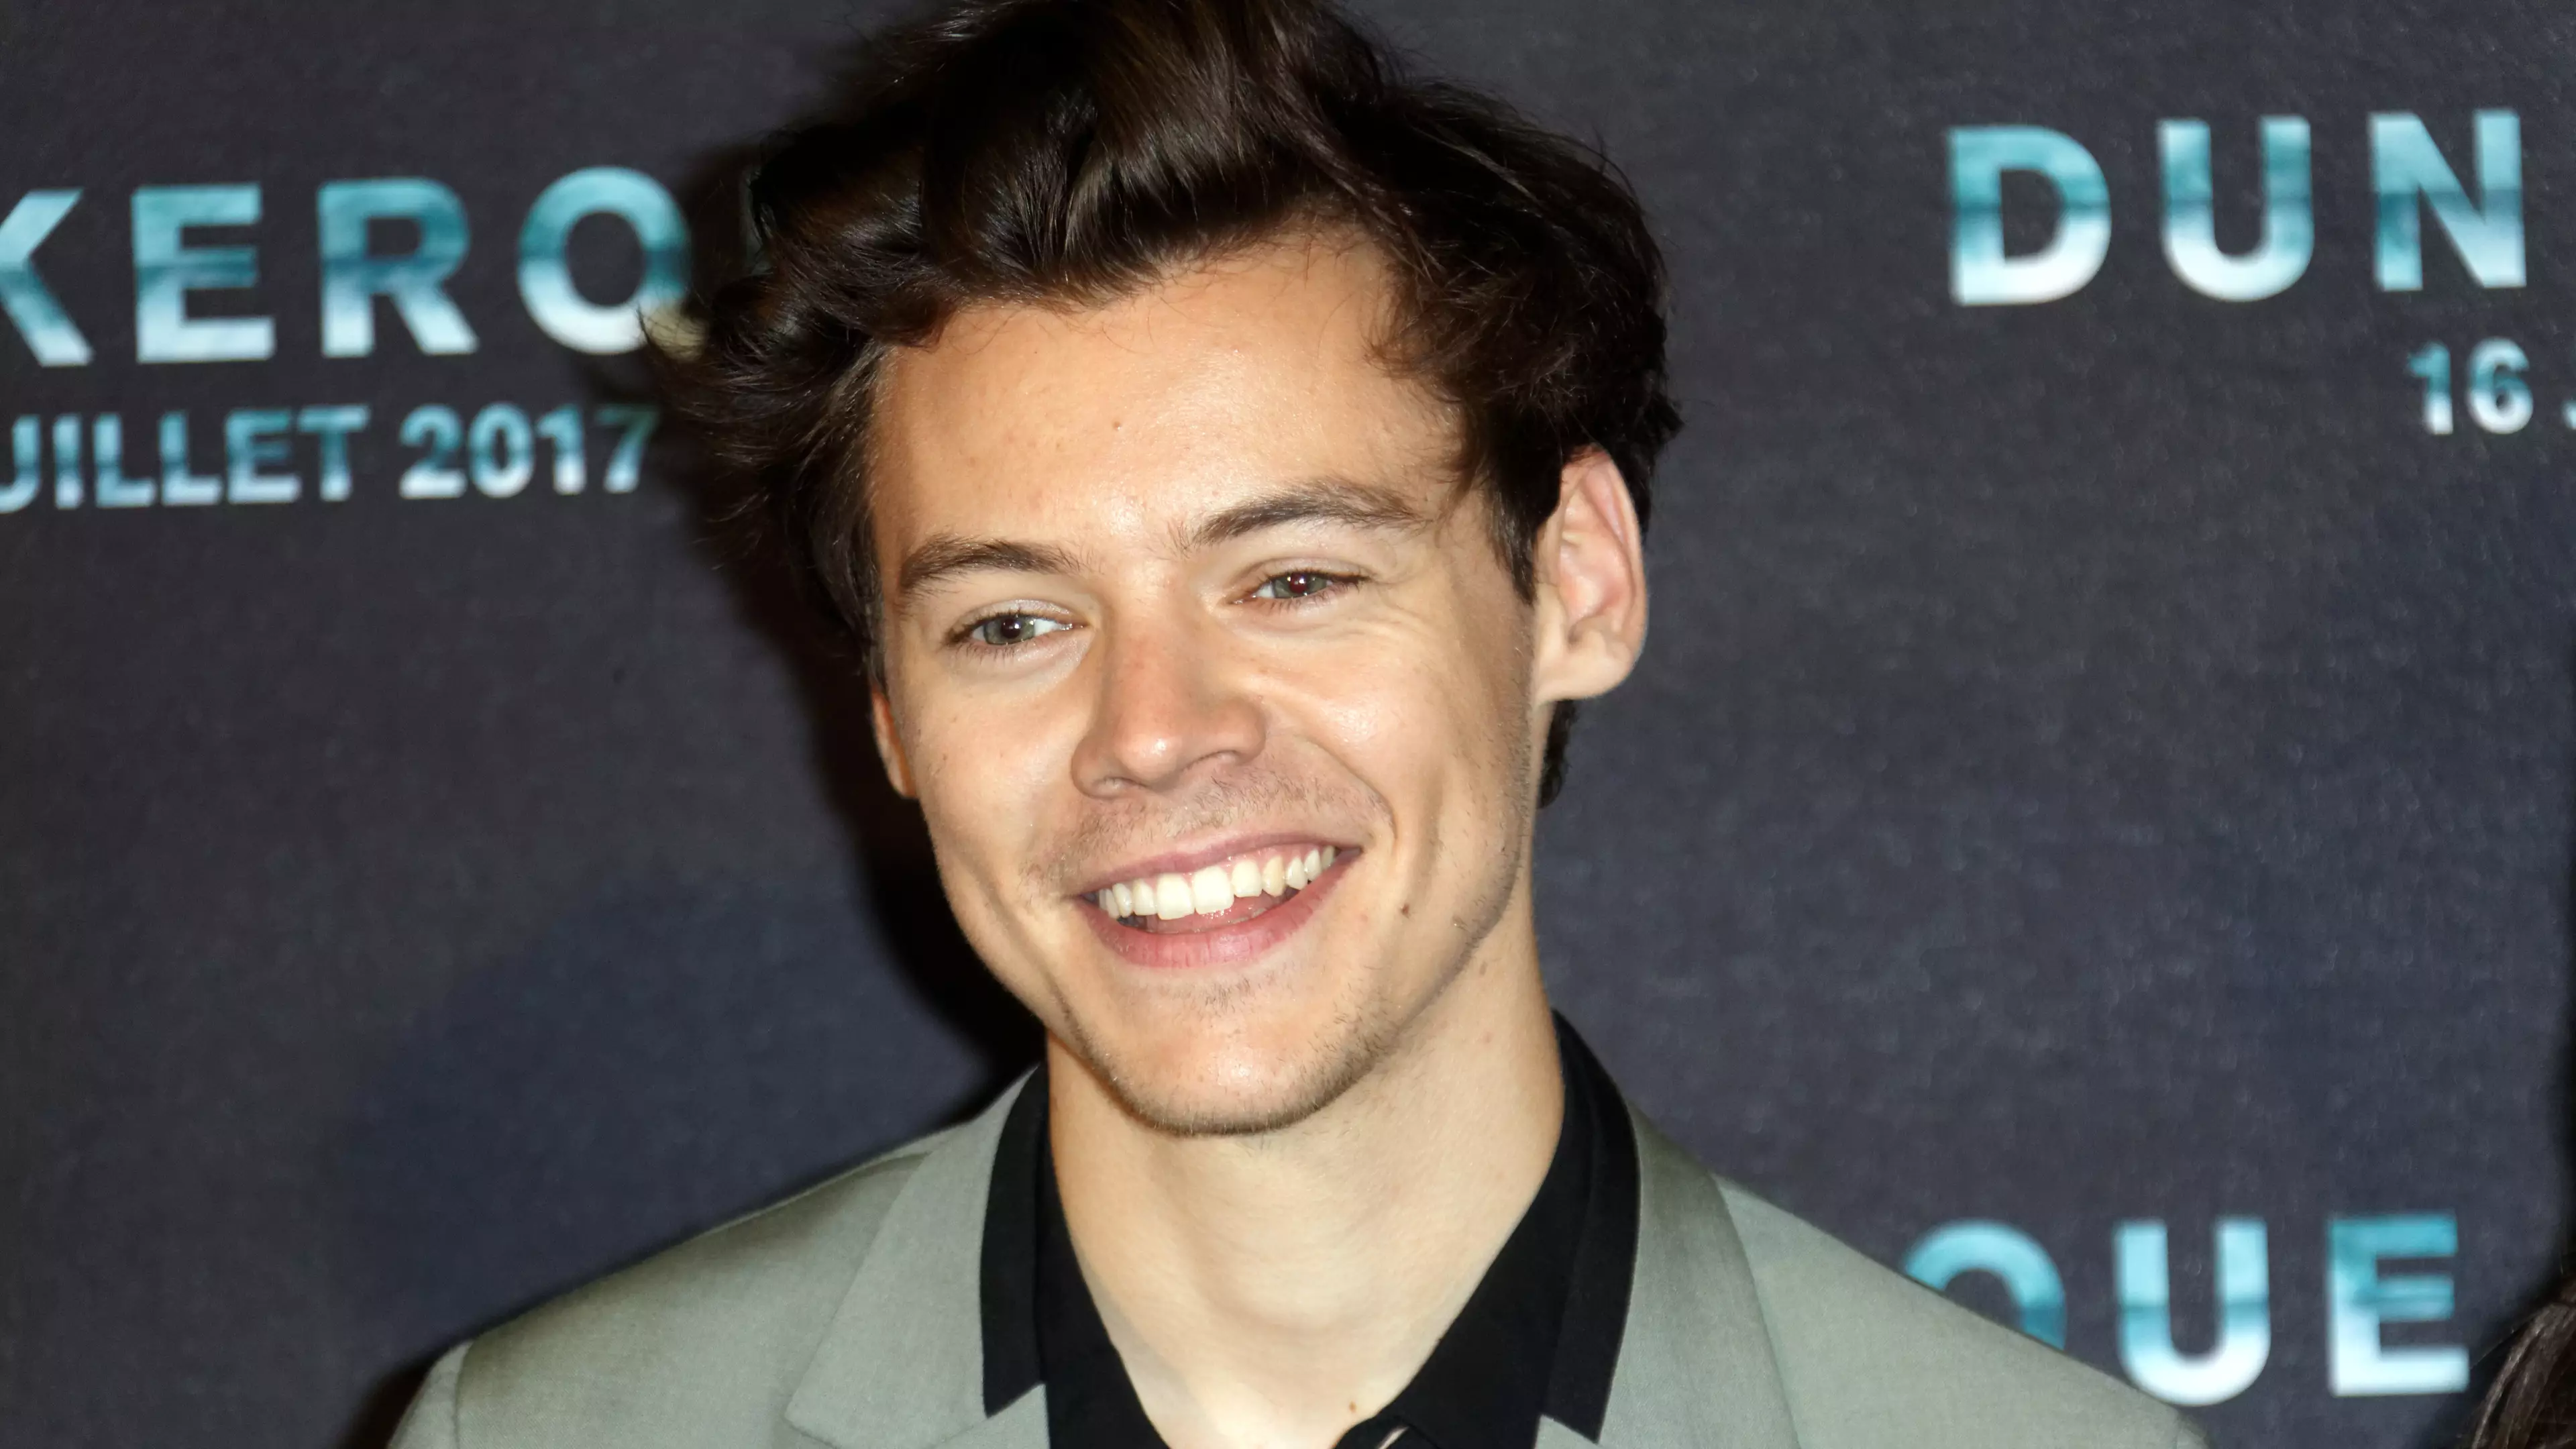 Harry Styles 'In Talks' To Play Prince Eric In 'The Little Mermaid' And We're DEAD